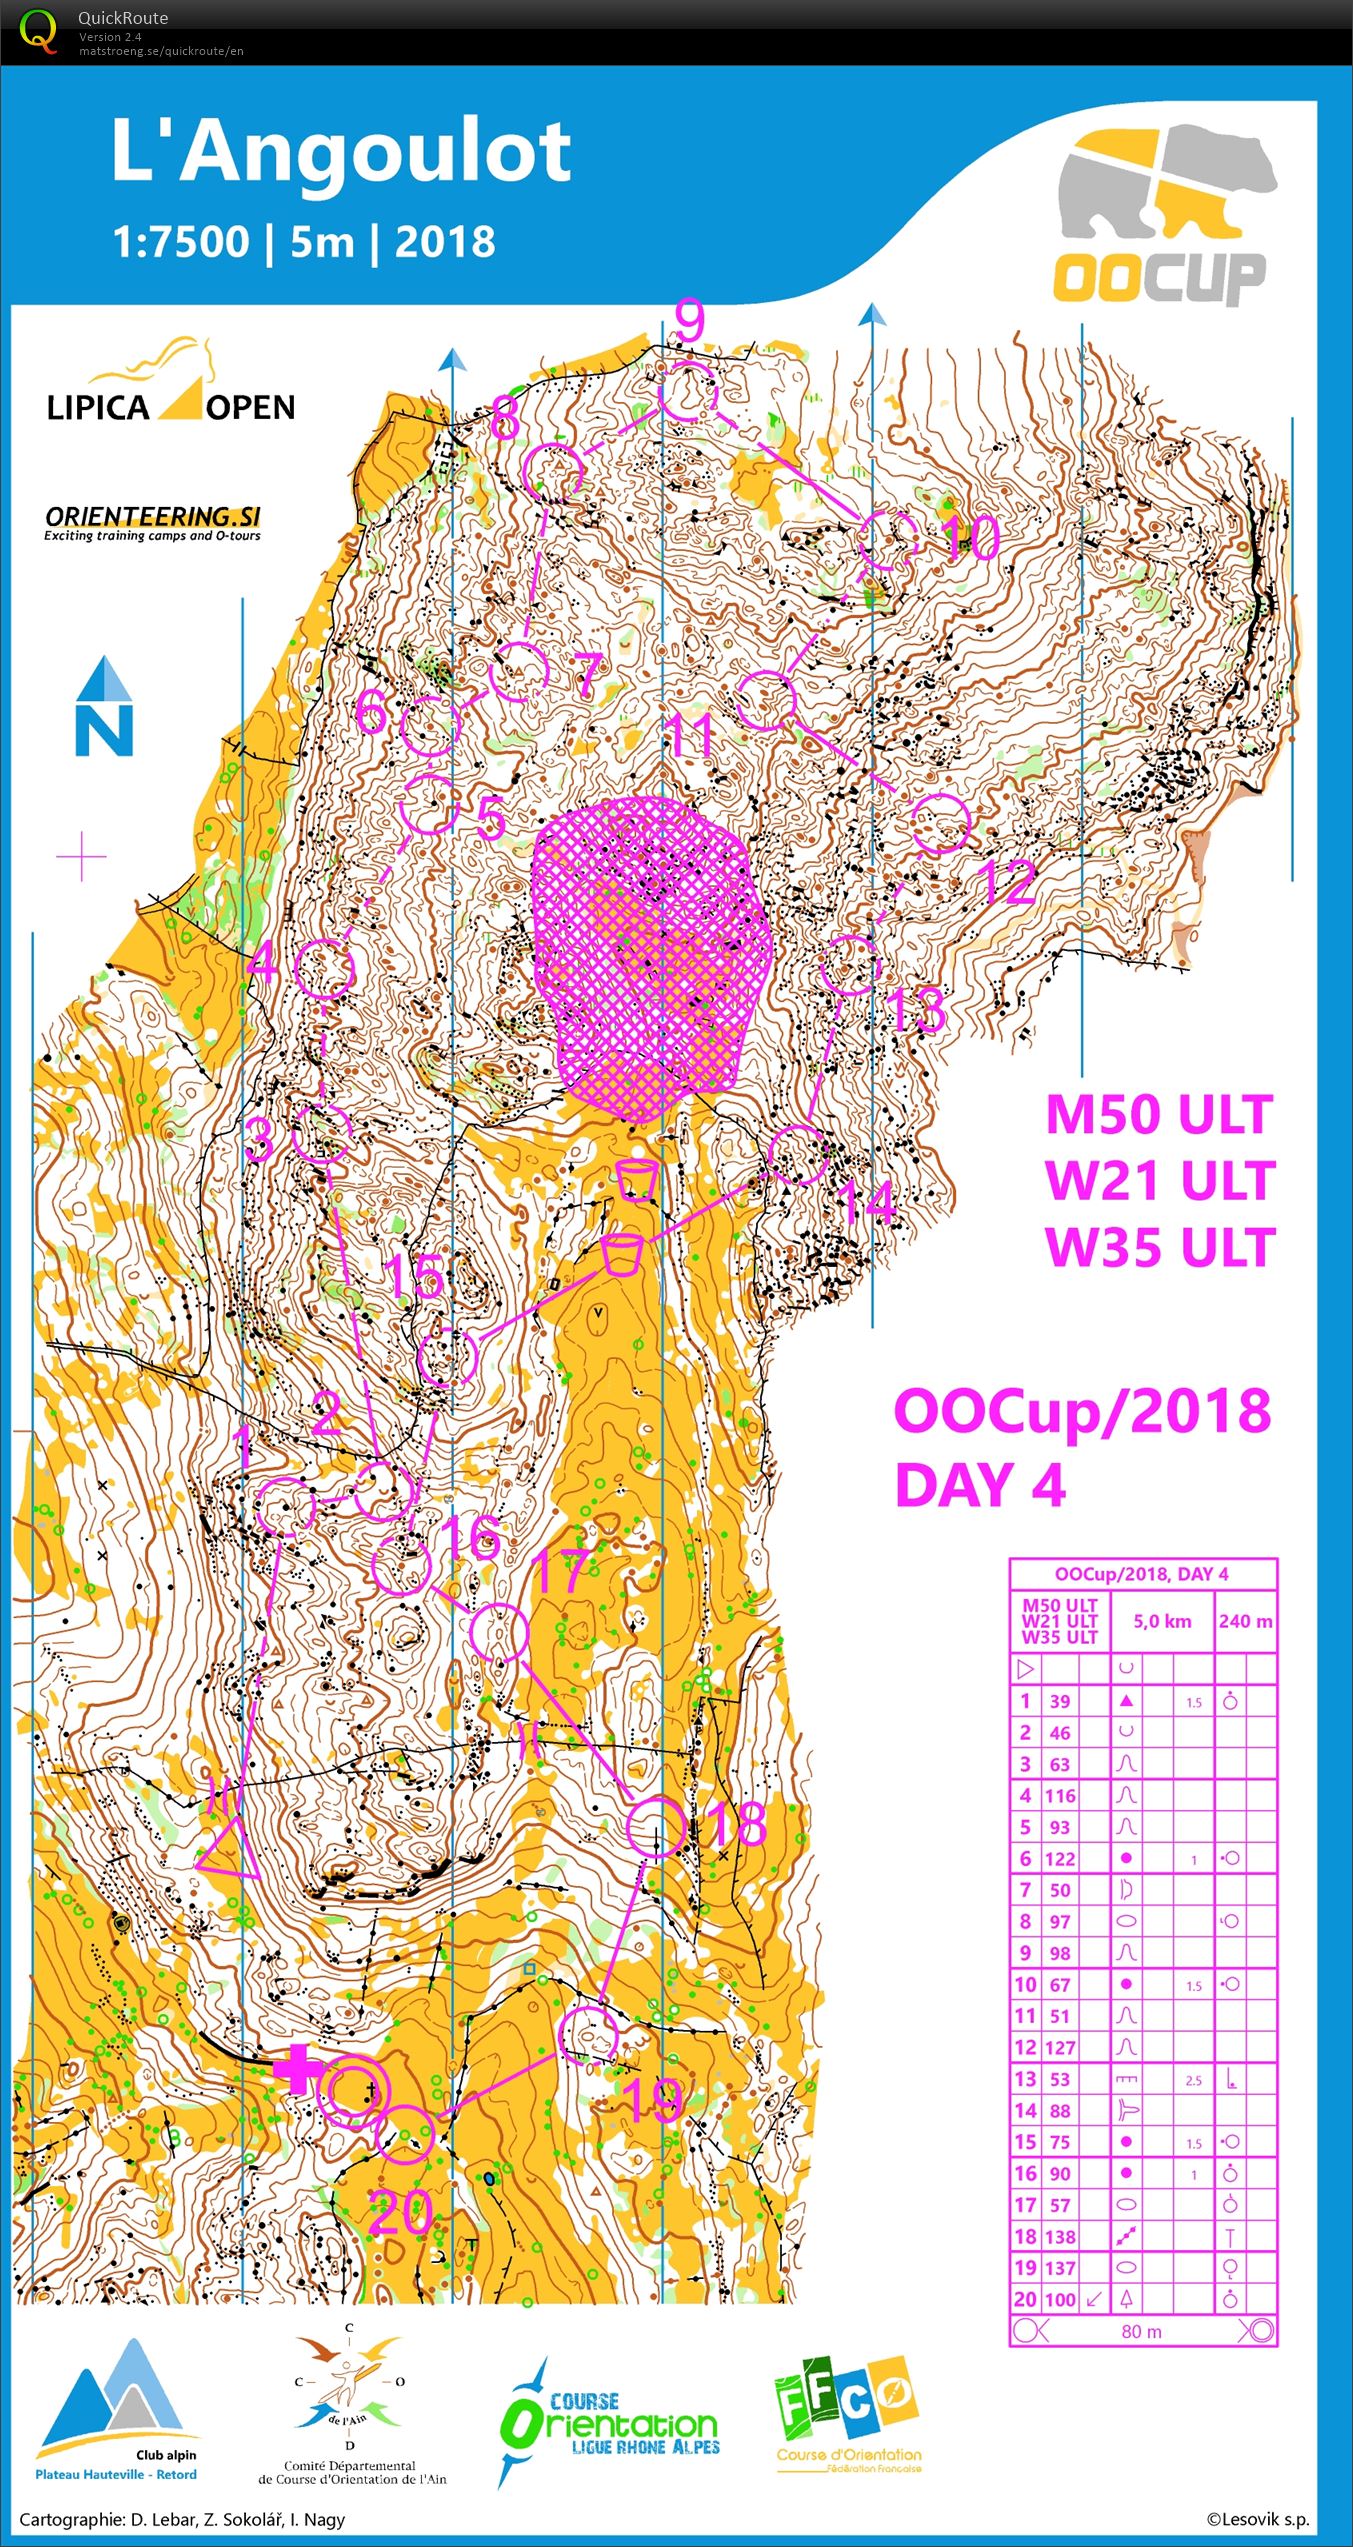 OOcup 2018 - Day 4 (28.07.2018)